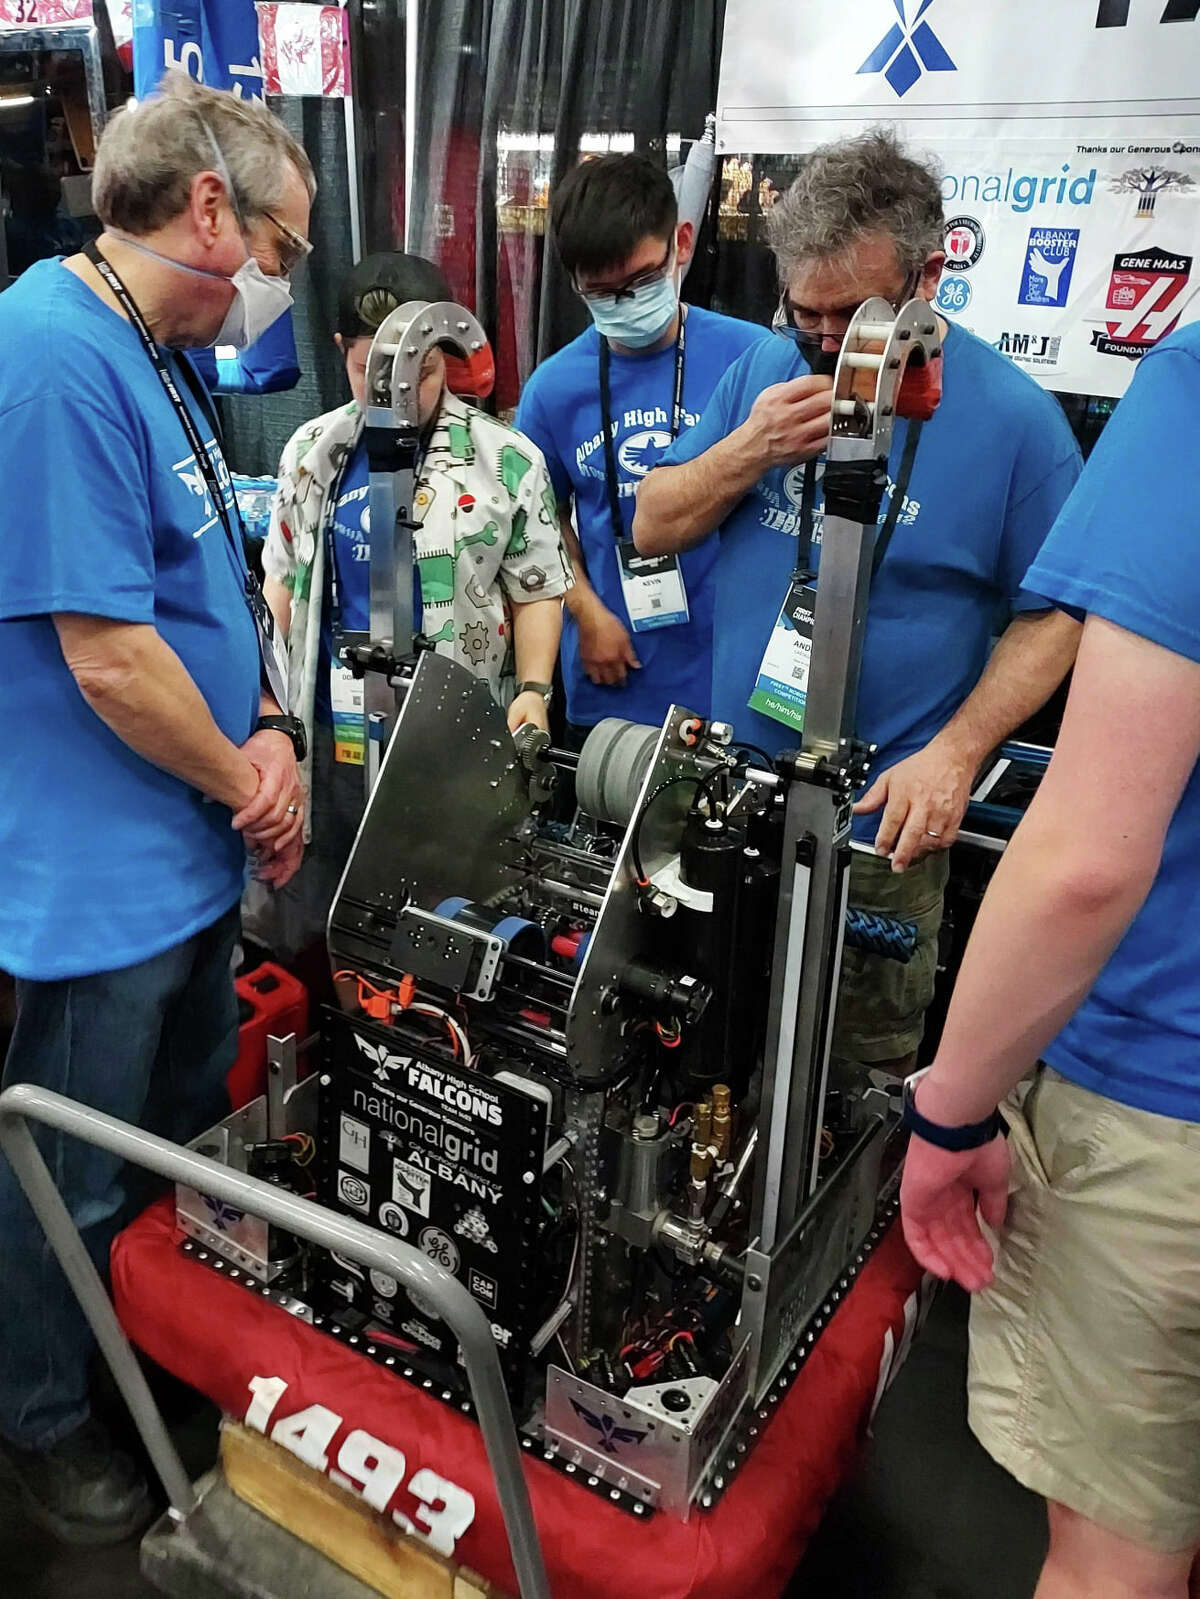 The Albany Robotics Team prepares their robot for a match at the championship in Houston.